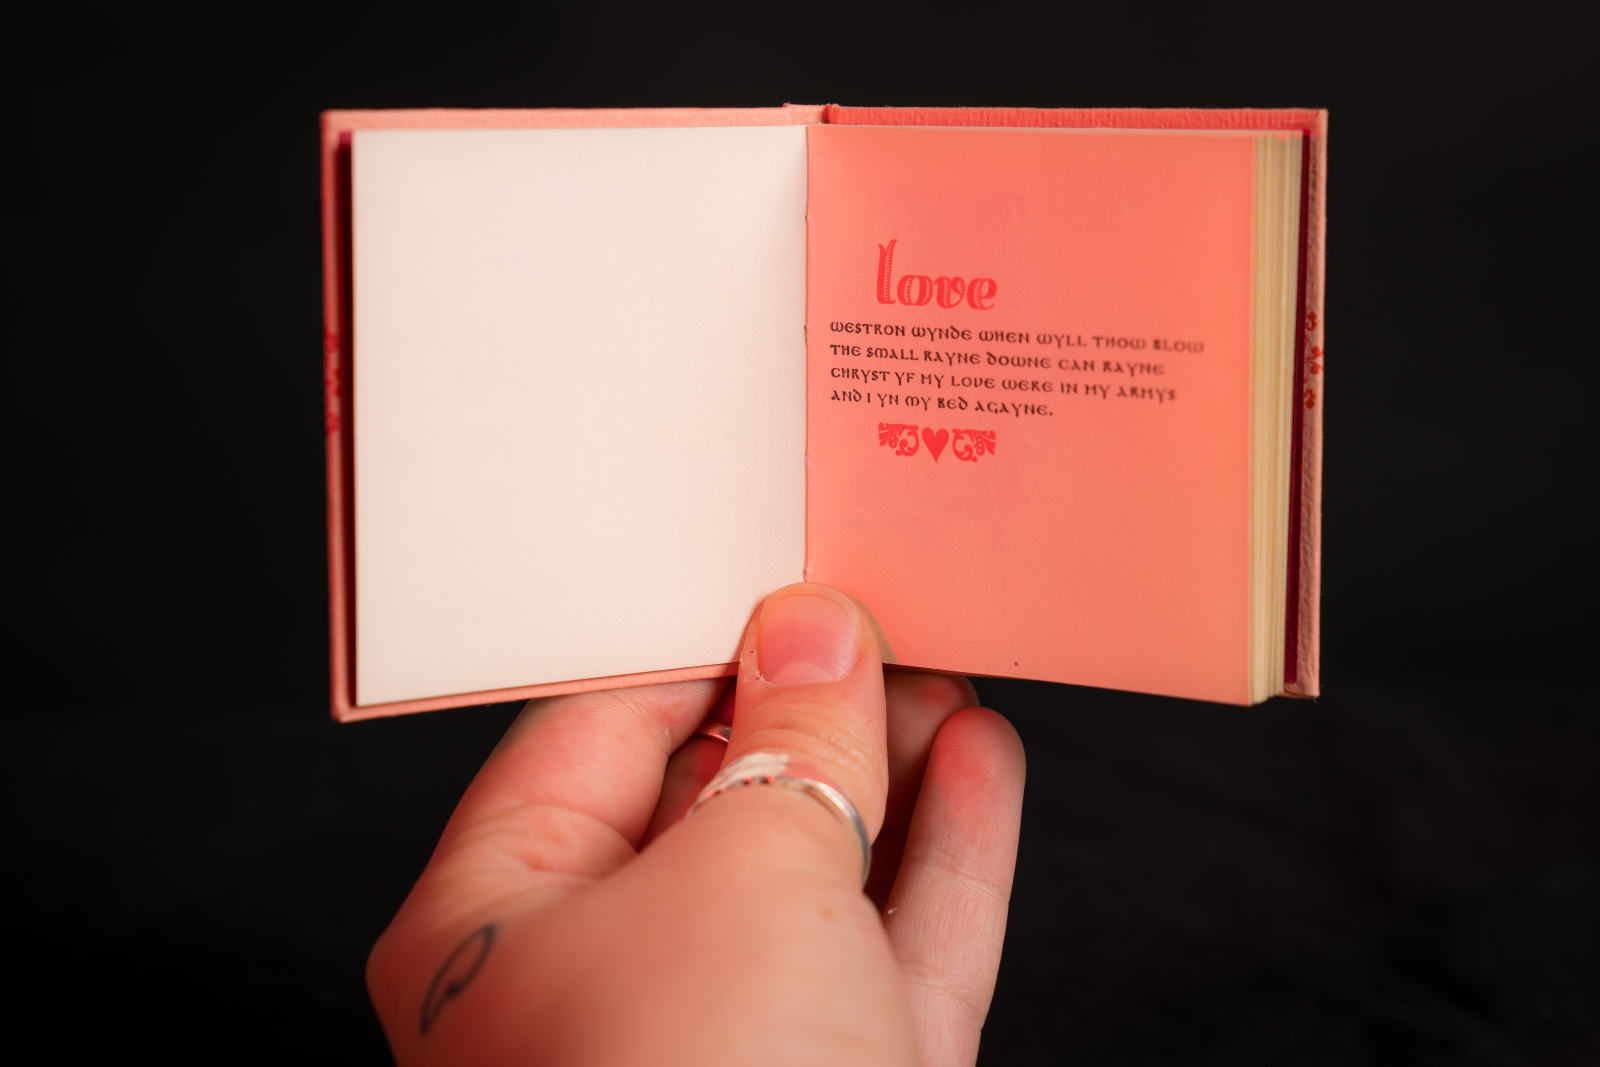 An Image of Love by Don Greame Kelley and Susan Acker against a black background. The book is opened to a specific page, a hand holding the book open. The pages are pink